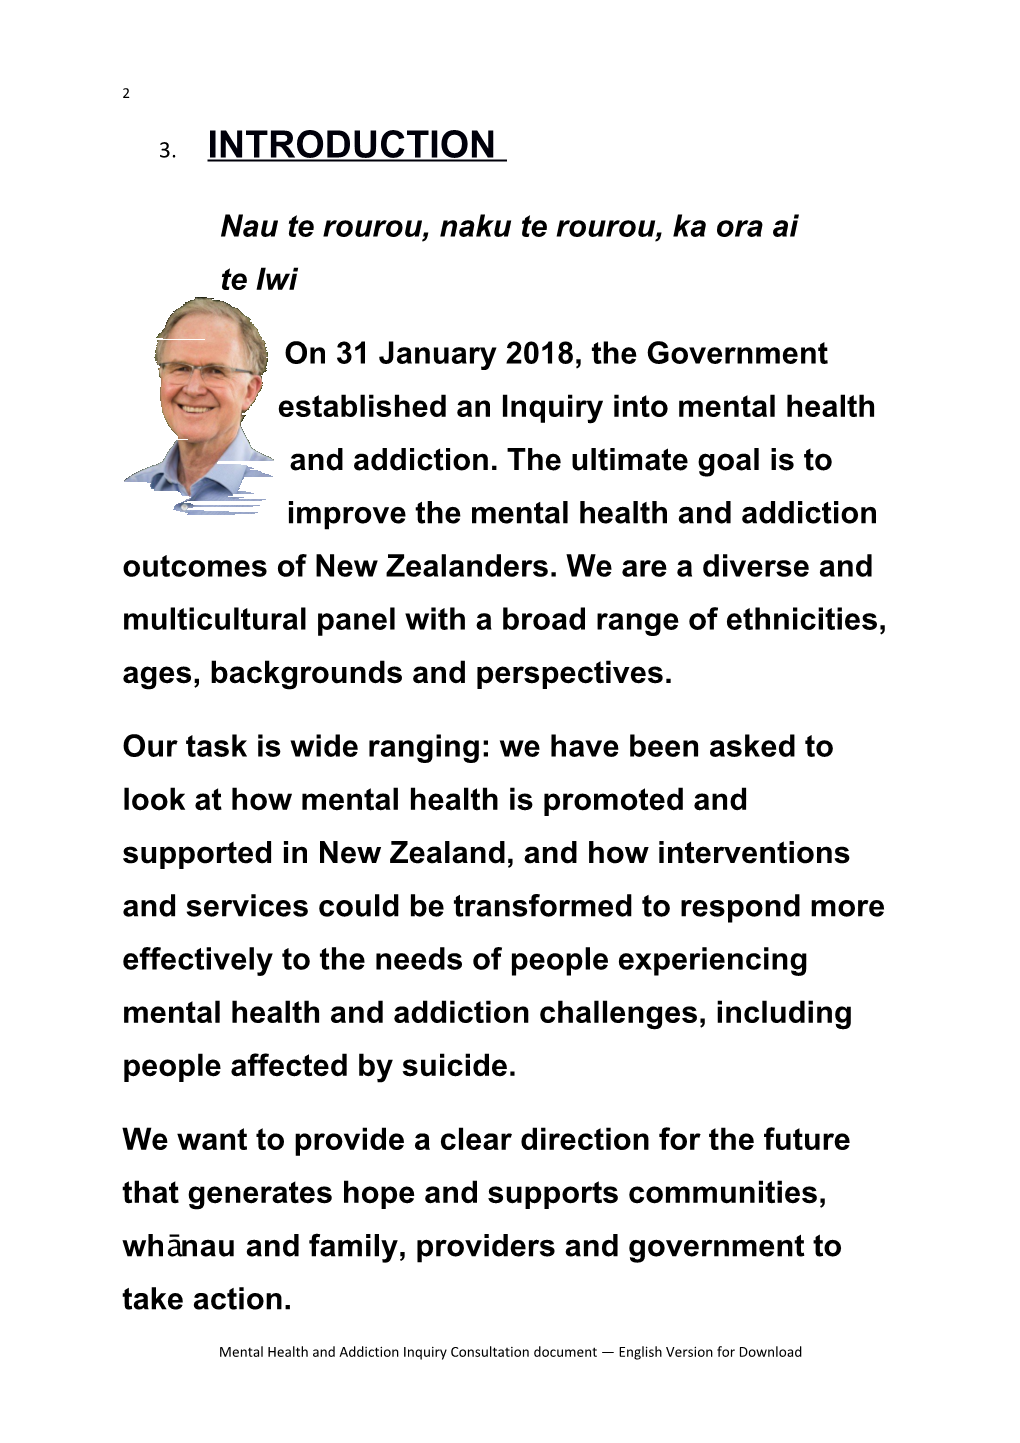 20180417 CONSULTATION FINAL DRAFT - Mental Health and Addiction Inquiry Consultation Document